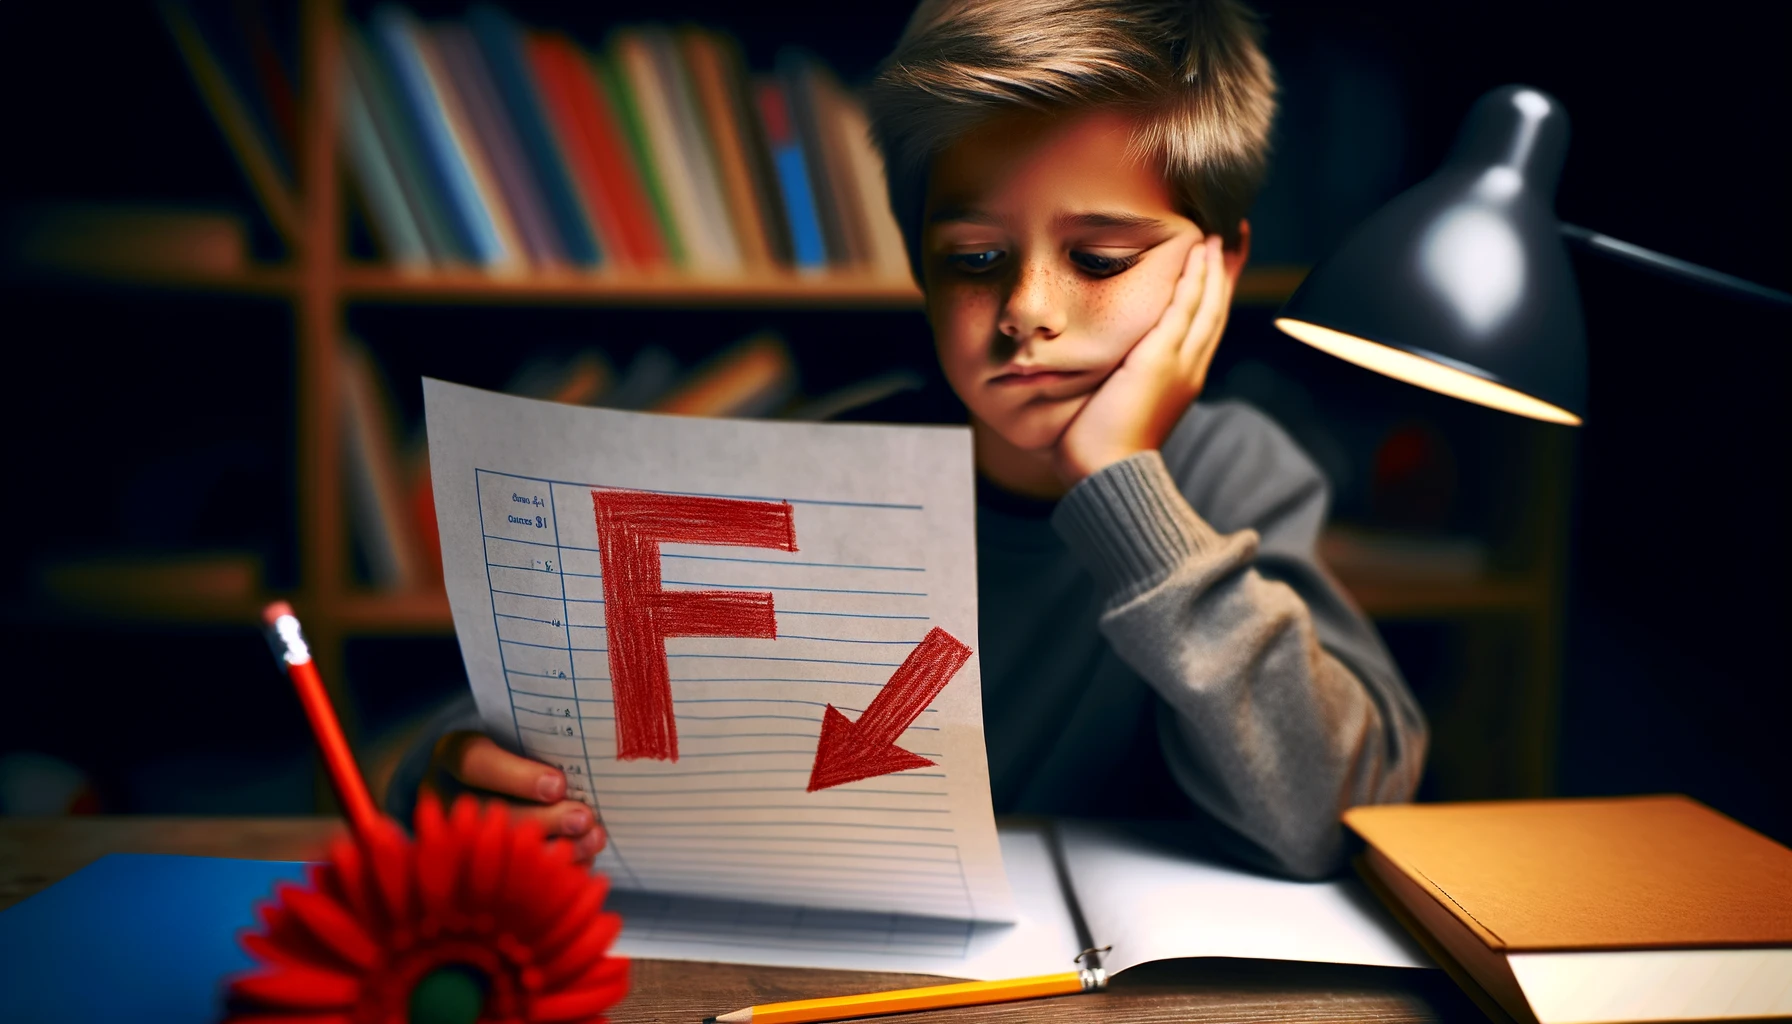 Claim: Measuring student performance with the U.S. grading system is a hindrance to learning.